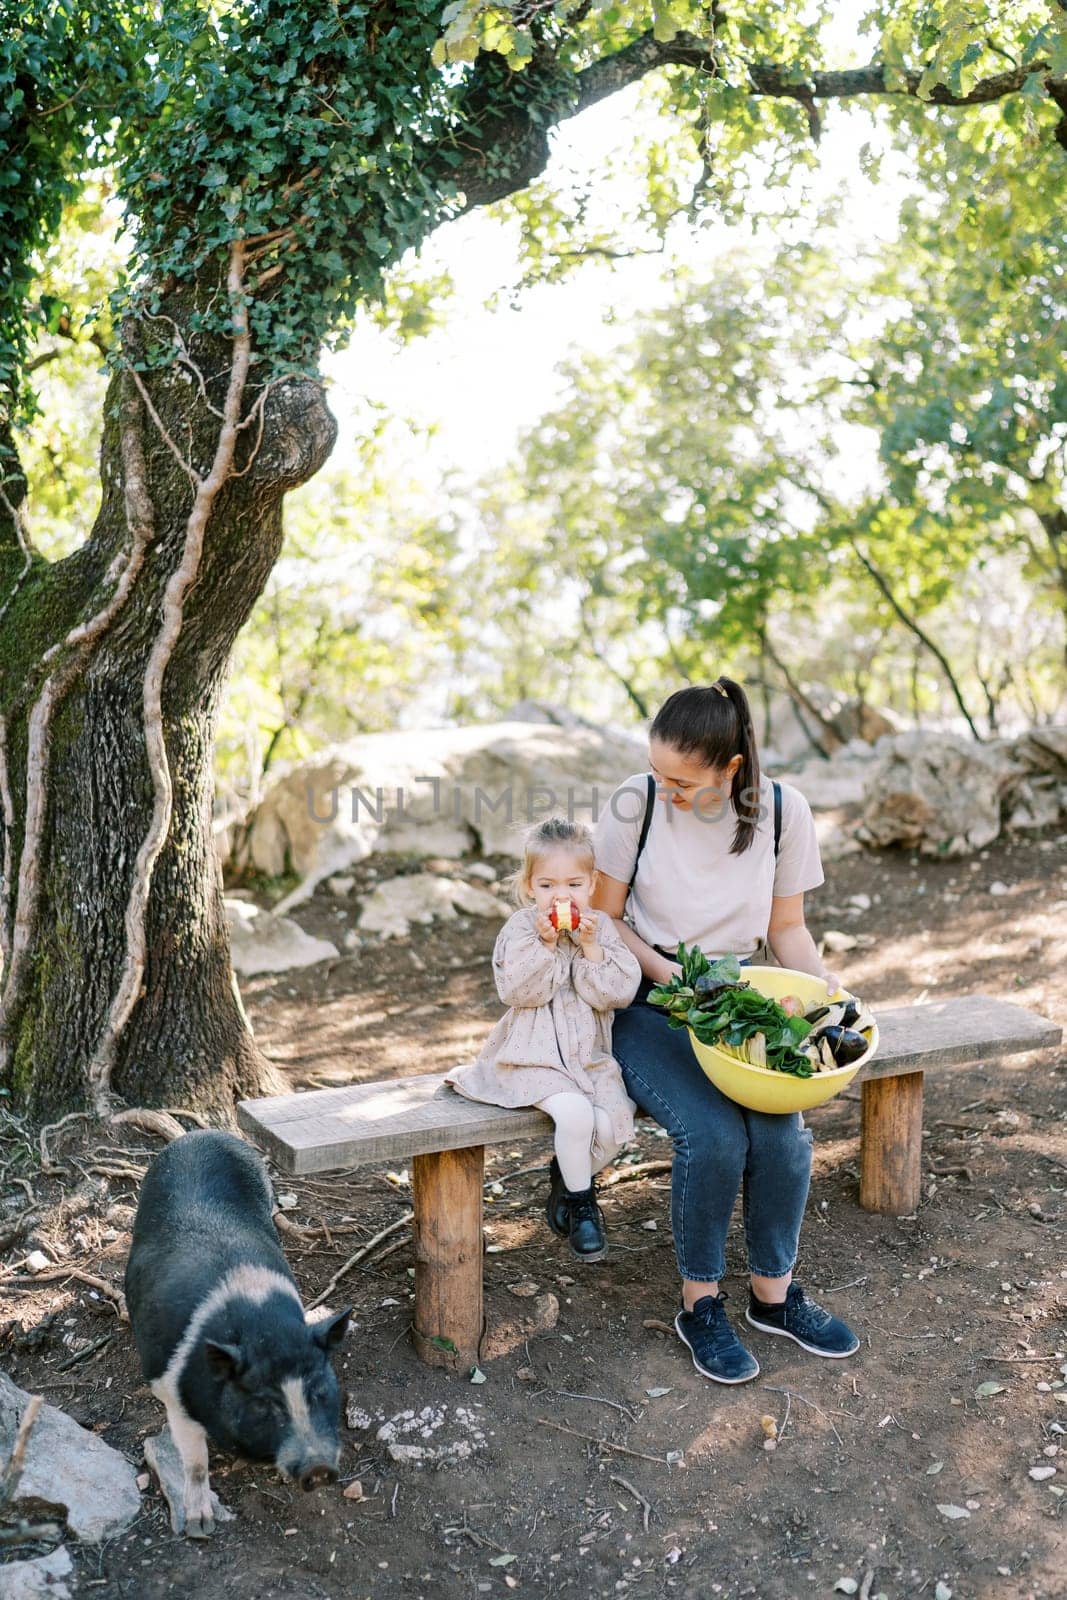 Mom with a bowl of vegetables sits near a little girl eating an apple on a park bench near a dwarf pig. High quality photo